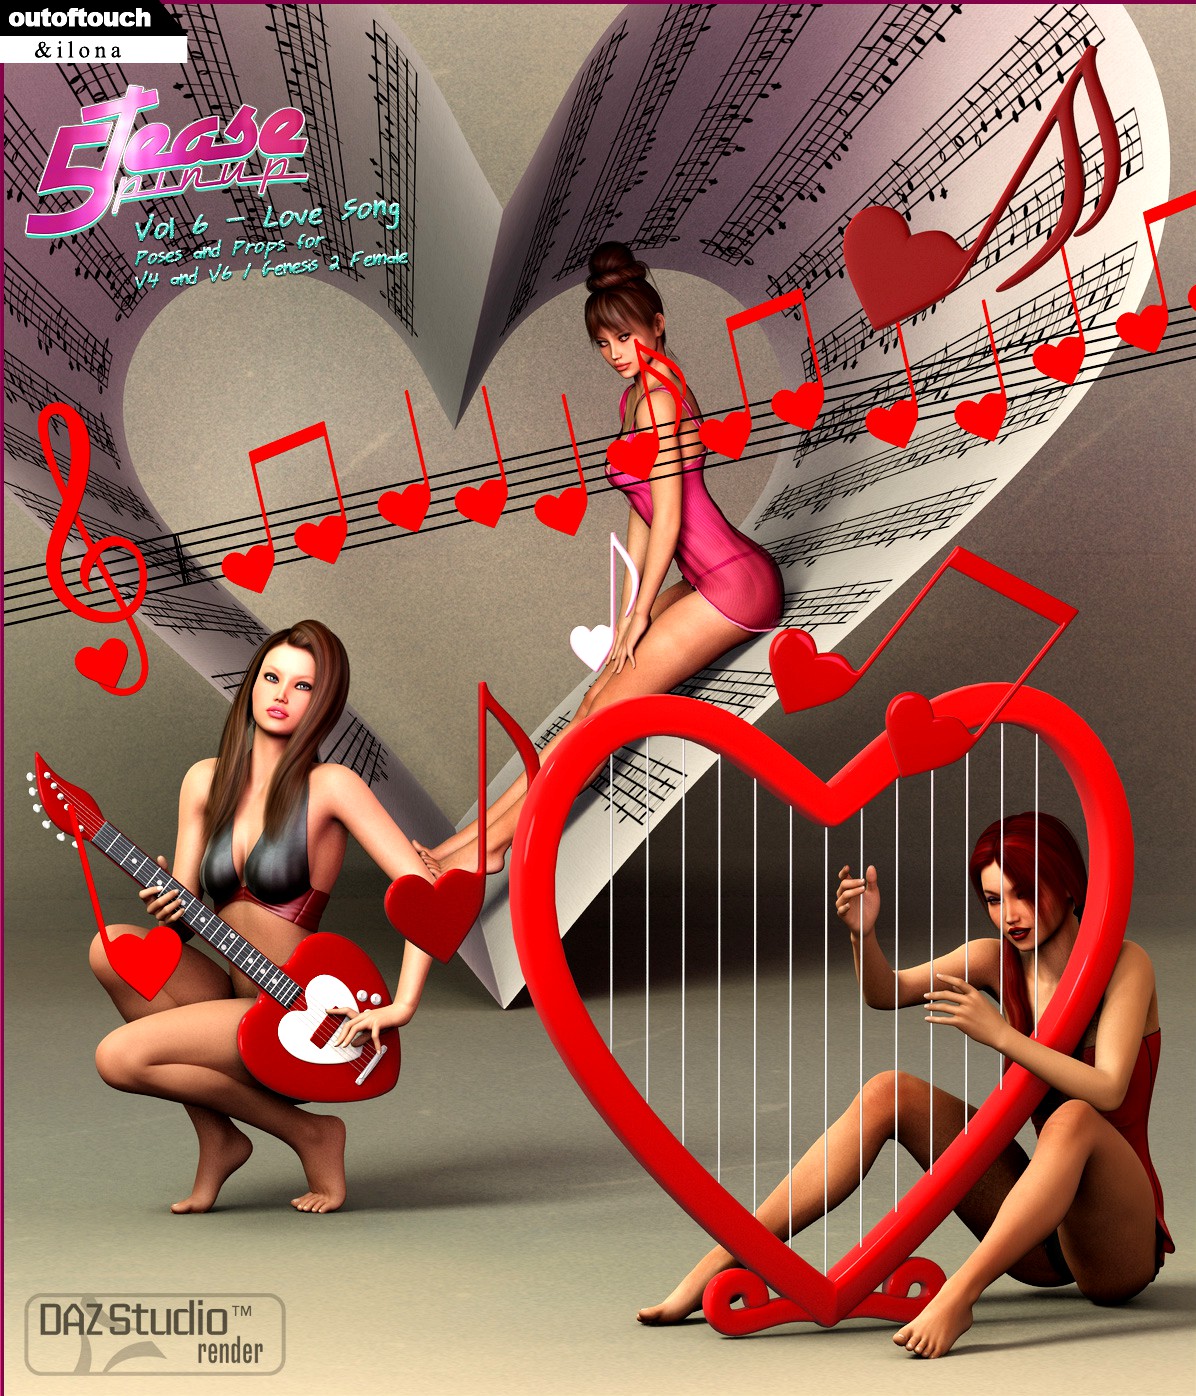 5TEASE PinUp Vol 6: Love Song - Poses and Props for V4, V6 &amp; G2F